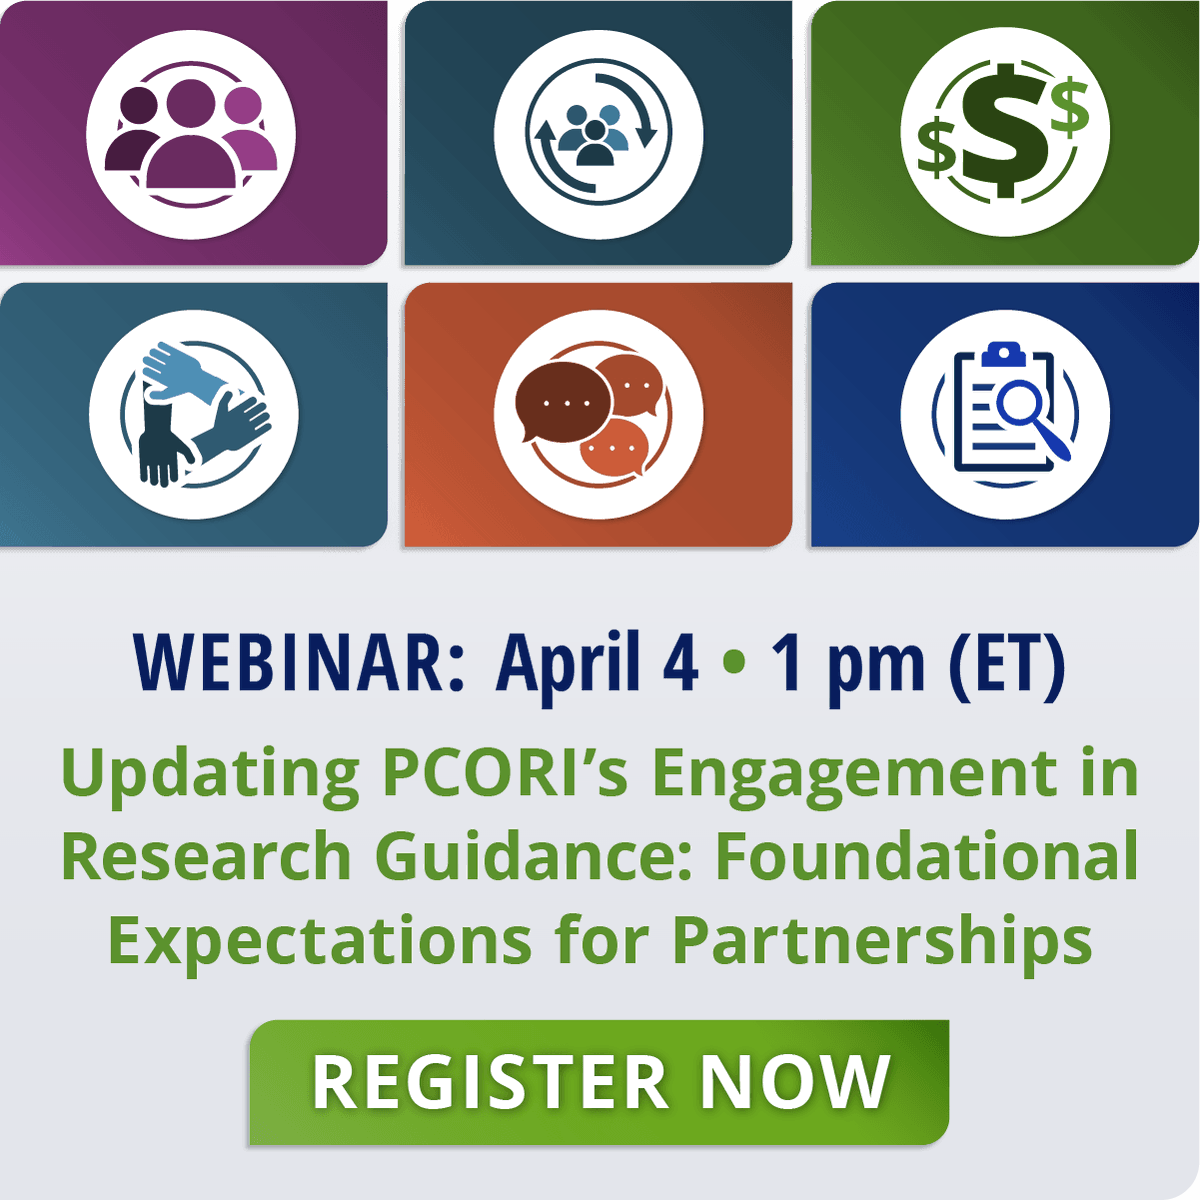 Don't forget! PCORI's Engagement in Research Guidance webinar is happening on April 4. Hear firsthand how revised guidelines benefit the research process and ask PCORI staff your most pressing questions. pcori.me/3IHtjmR